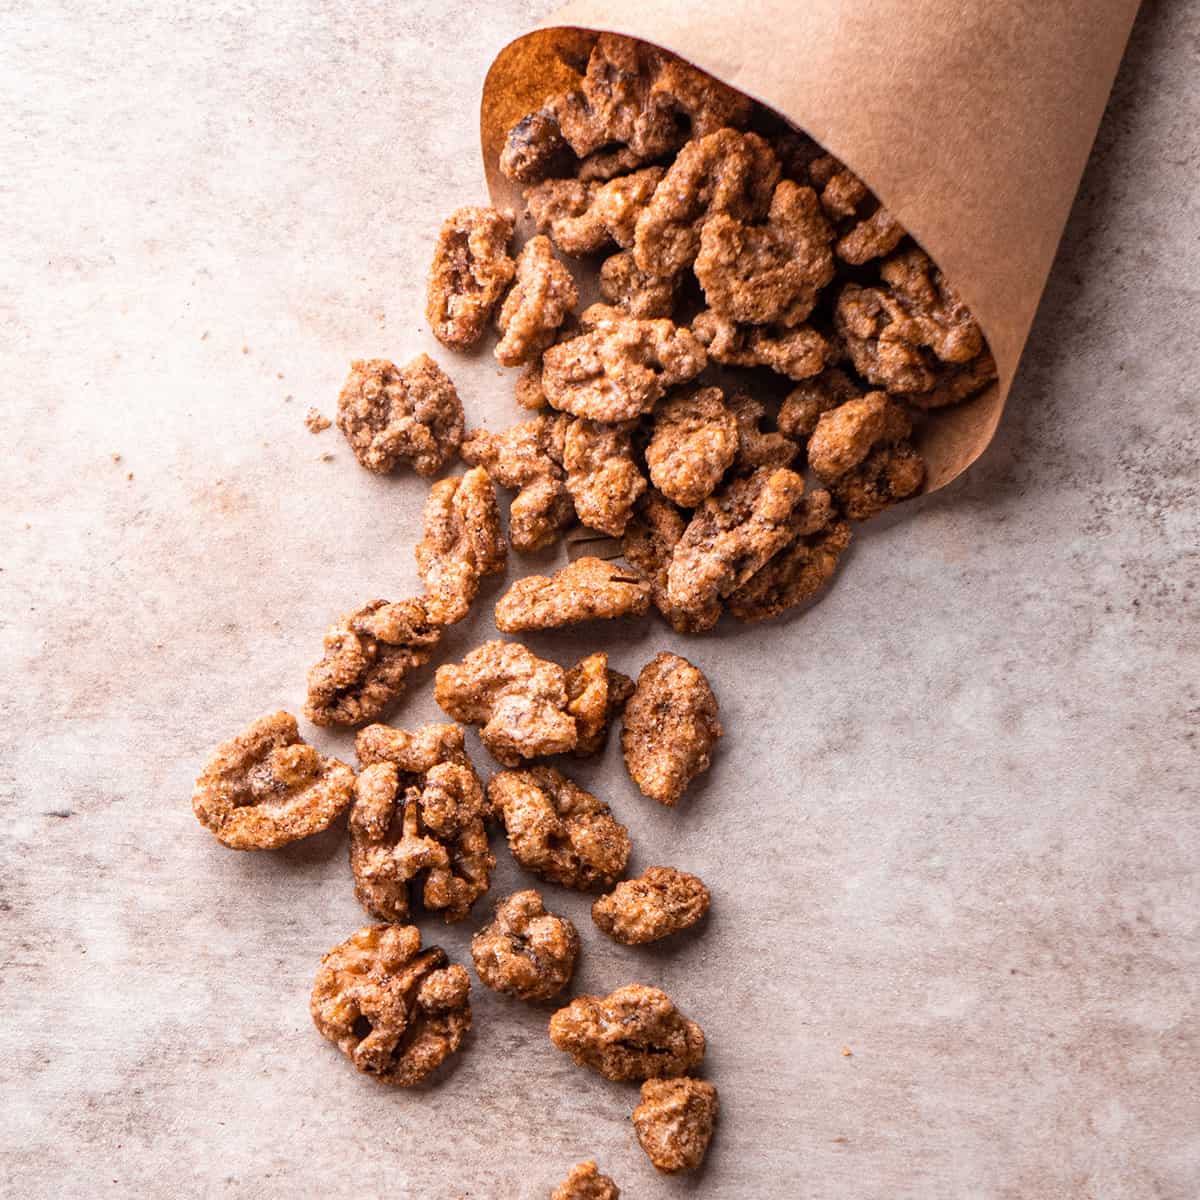 Candied Walnuts spilling out of a brown paper cone